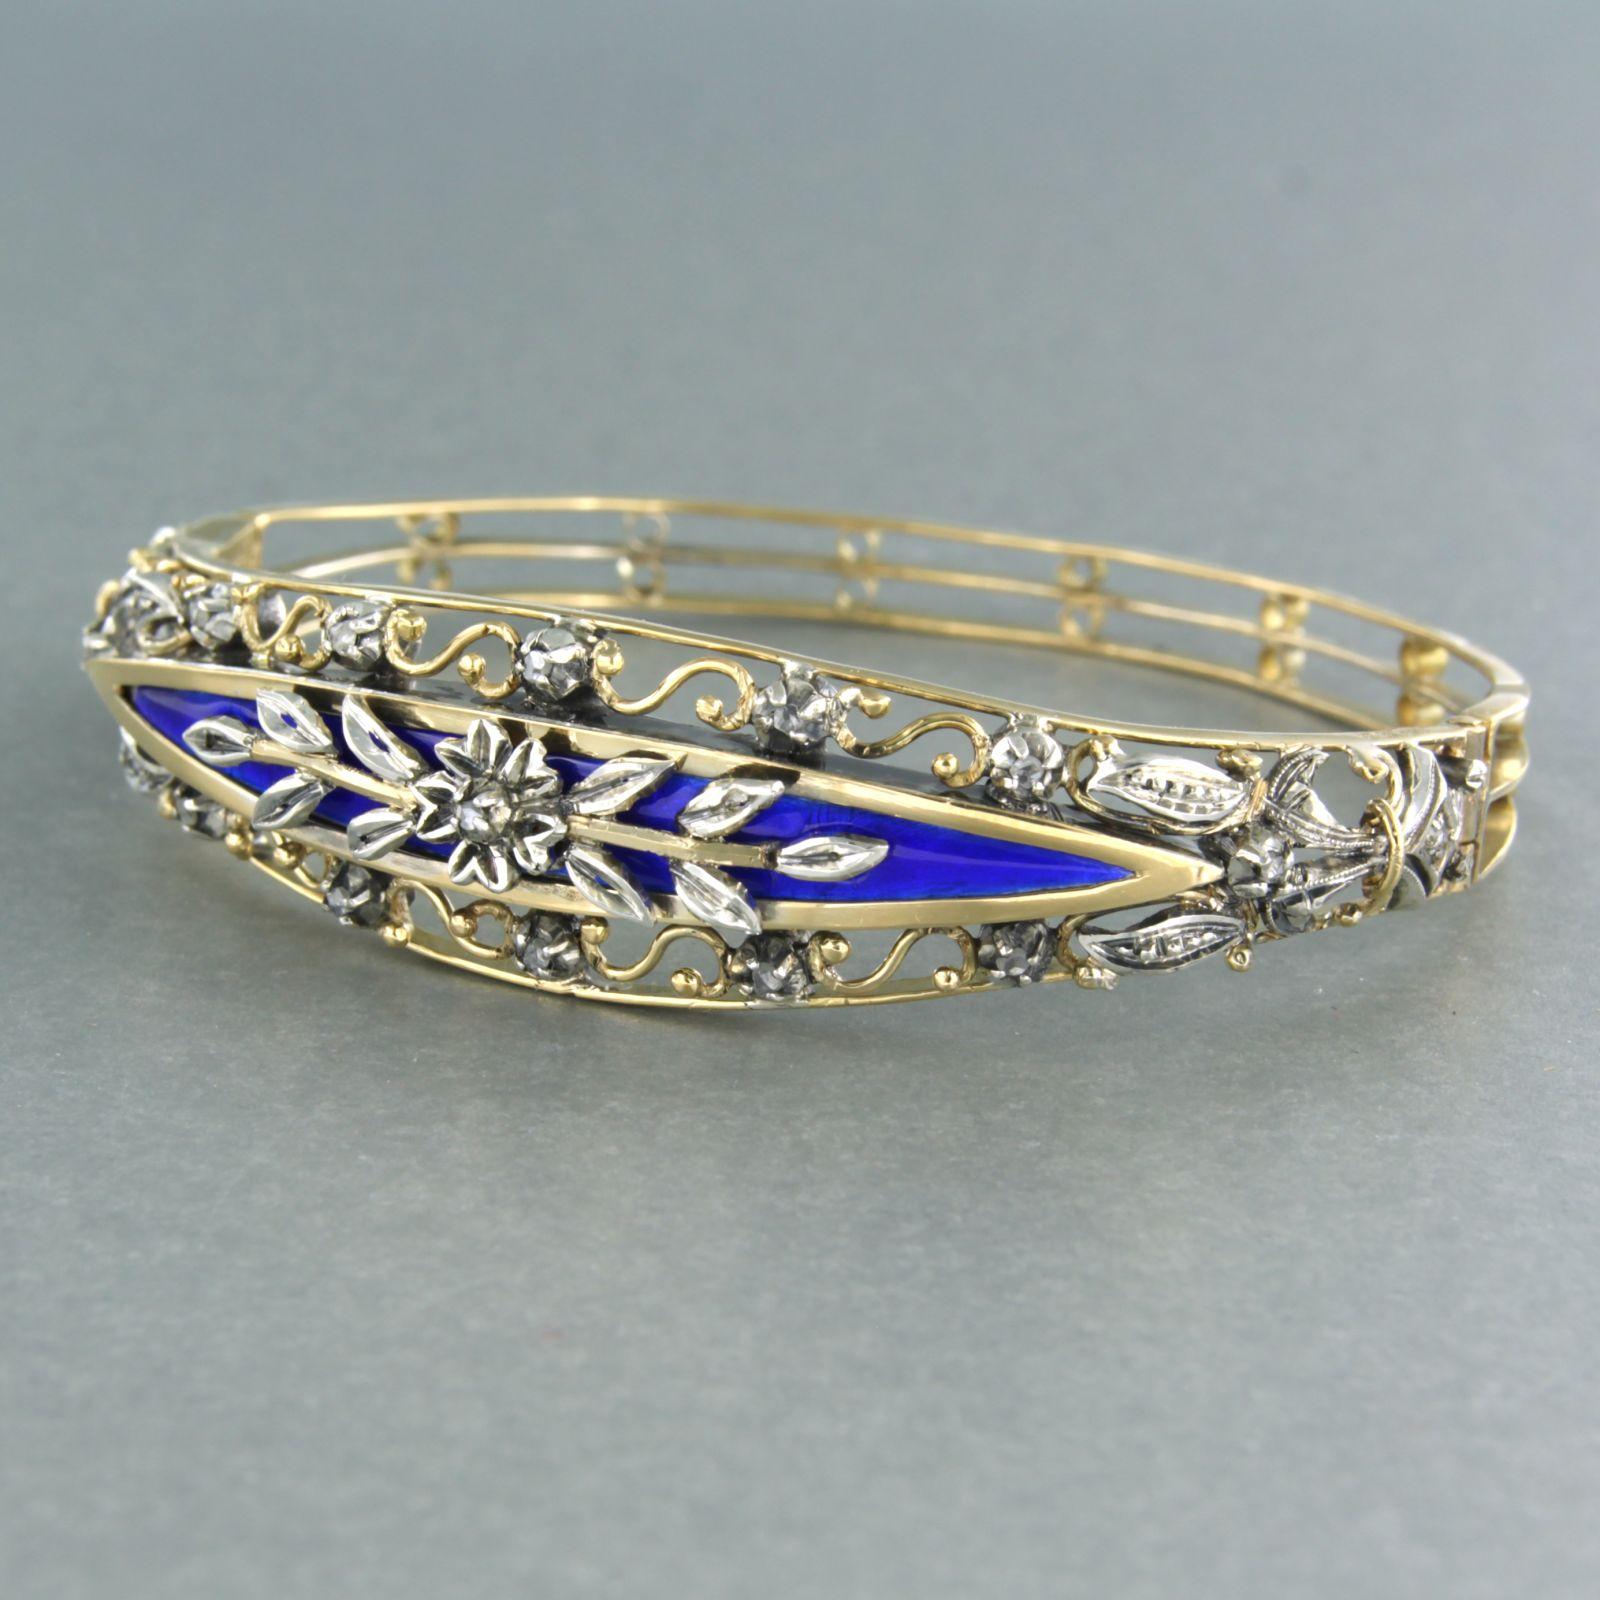 Early Victorian Bracelet with blue enamel and diamonds 18k gold with silver For Sale